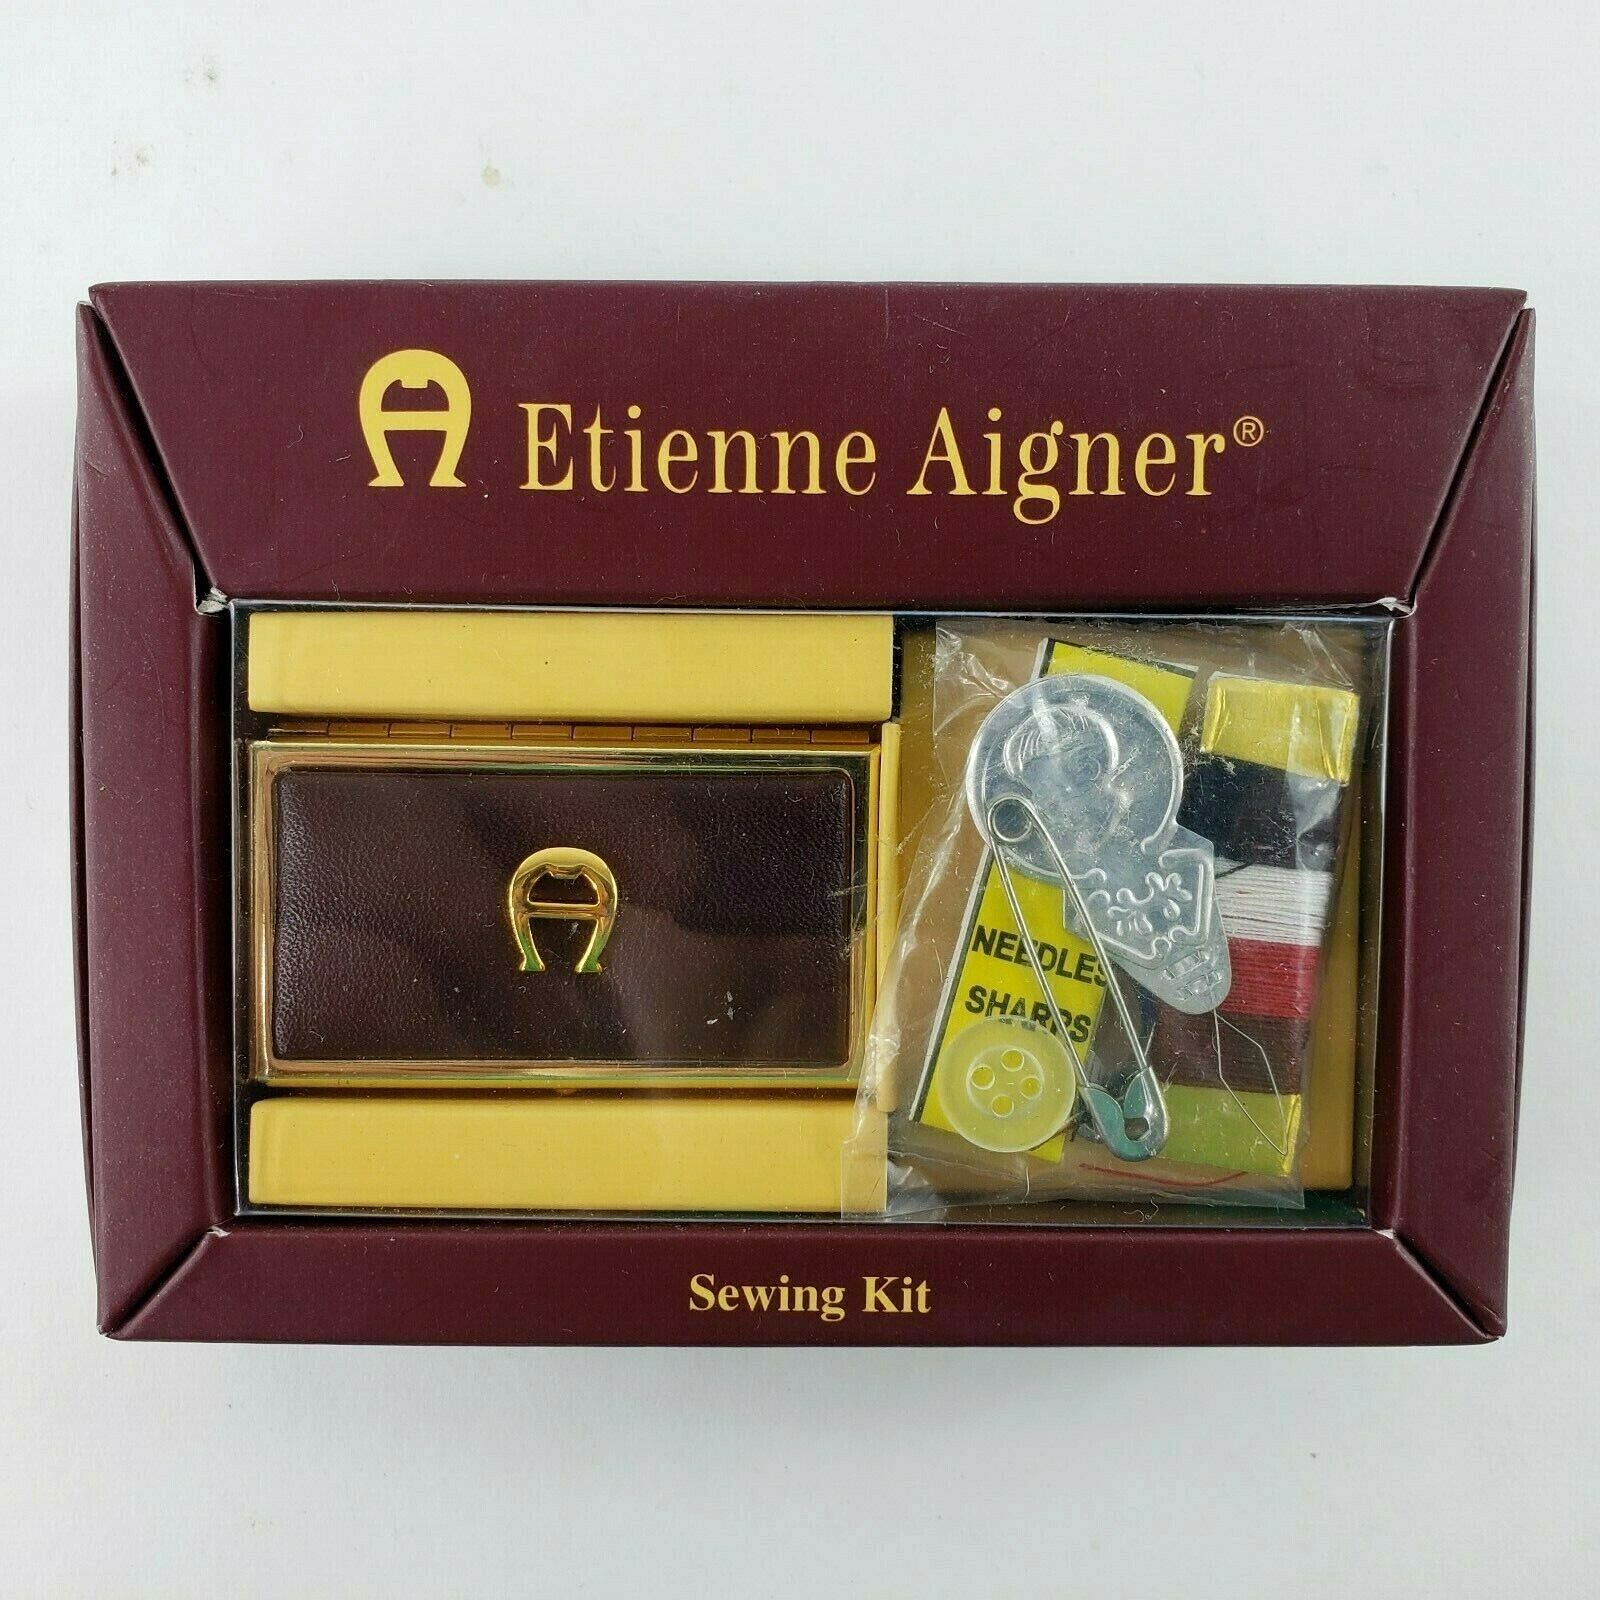 Etienne Aigner SEWING KIT Lesig Signature Burgundy Leather Top Metal Box NEW